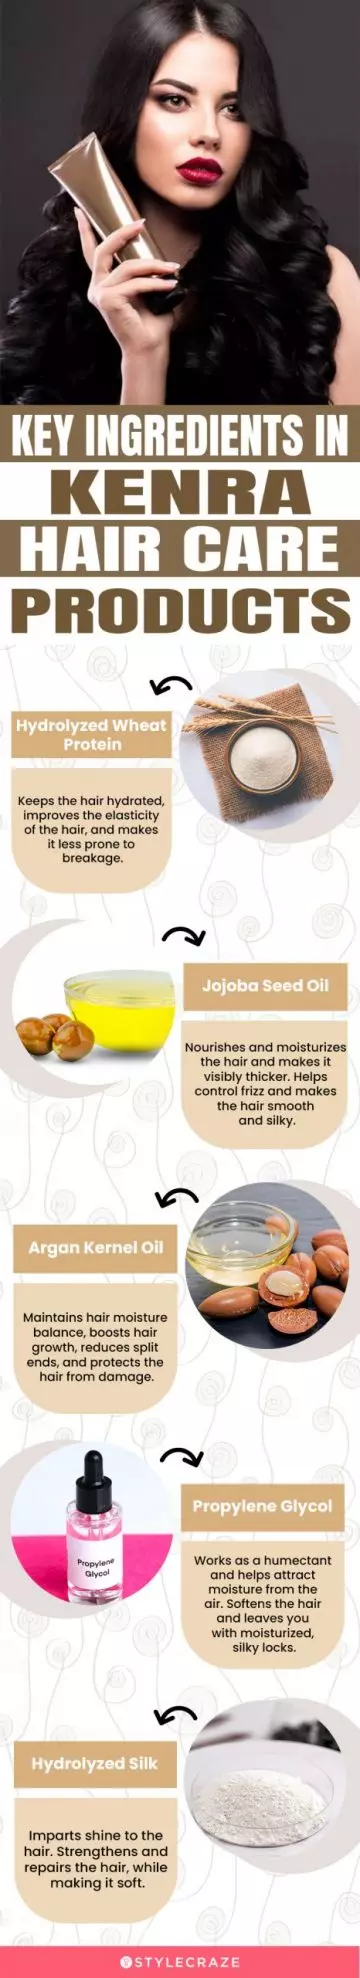 Key Ingredients In Kenra Hair Care Products (infographic)